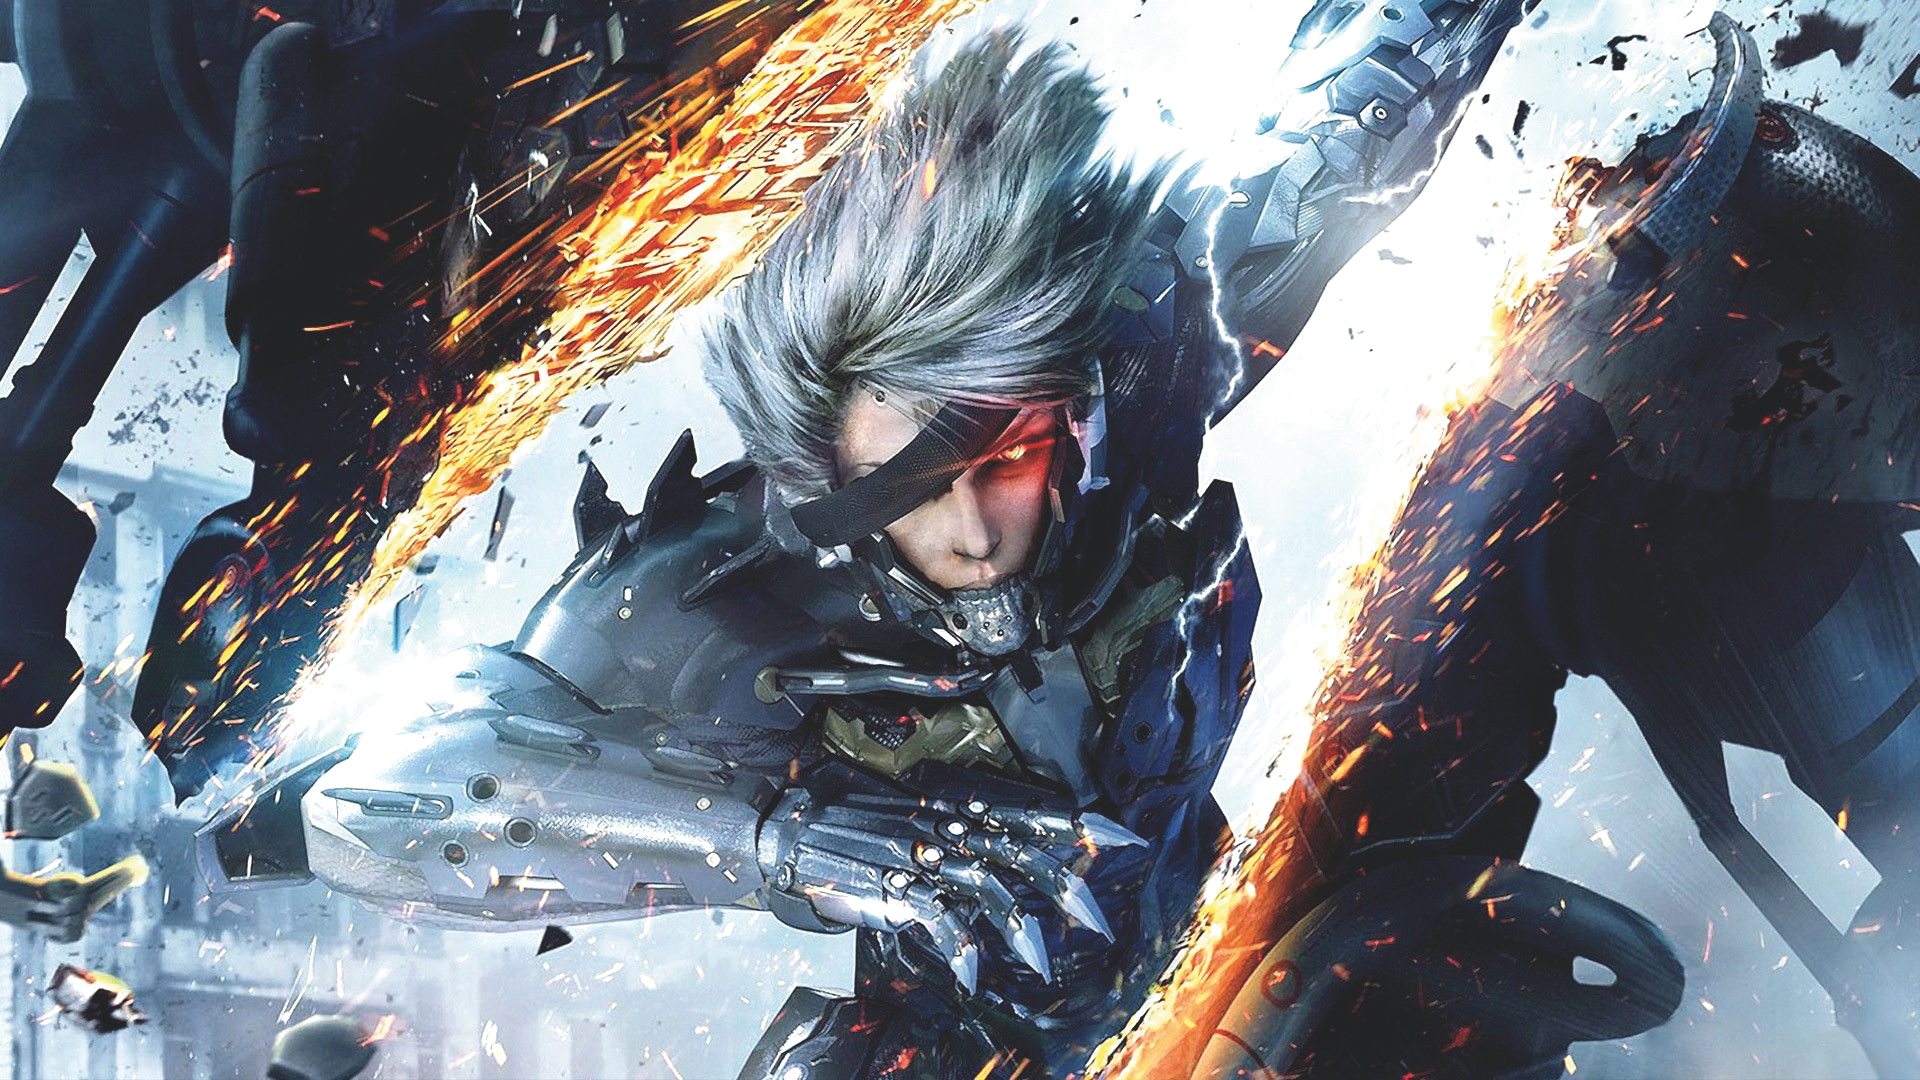 Metal Gear Rising: Revengeance rides memes and Twitch to a 500% boost in players on PC alone